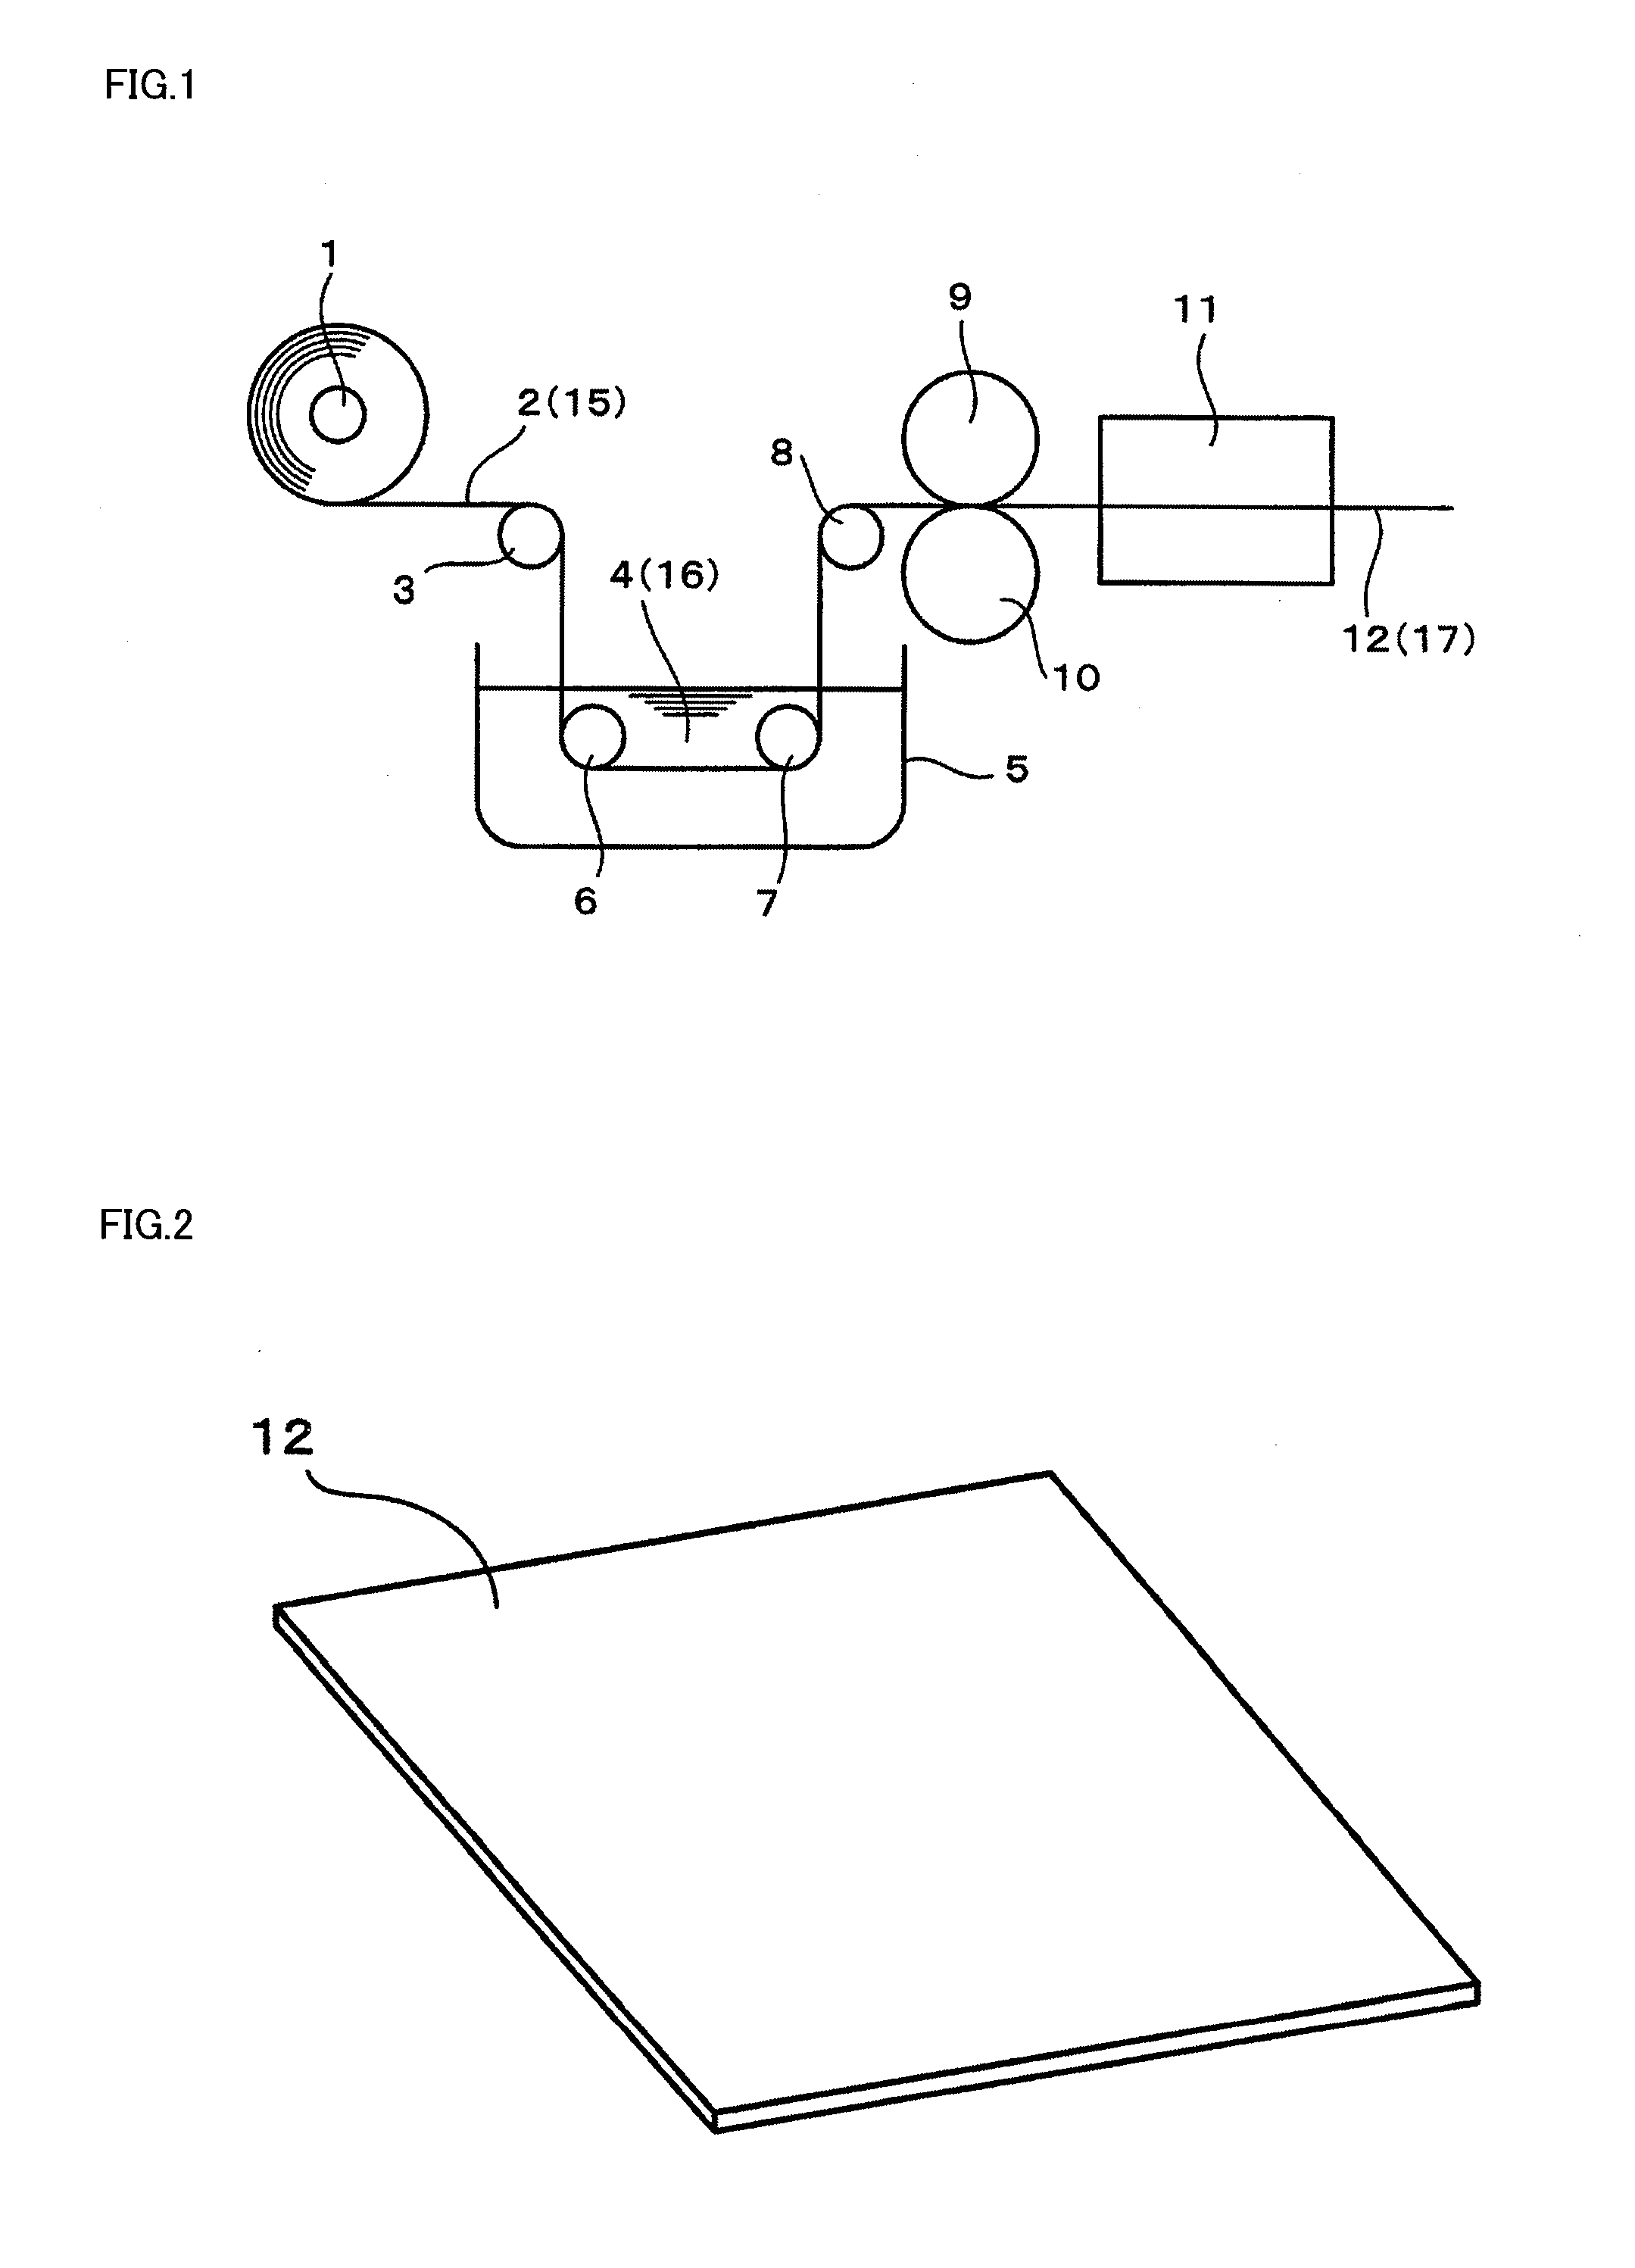 Sliding contact surface-forming material, and multi-layered sliding contact component having the same